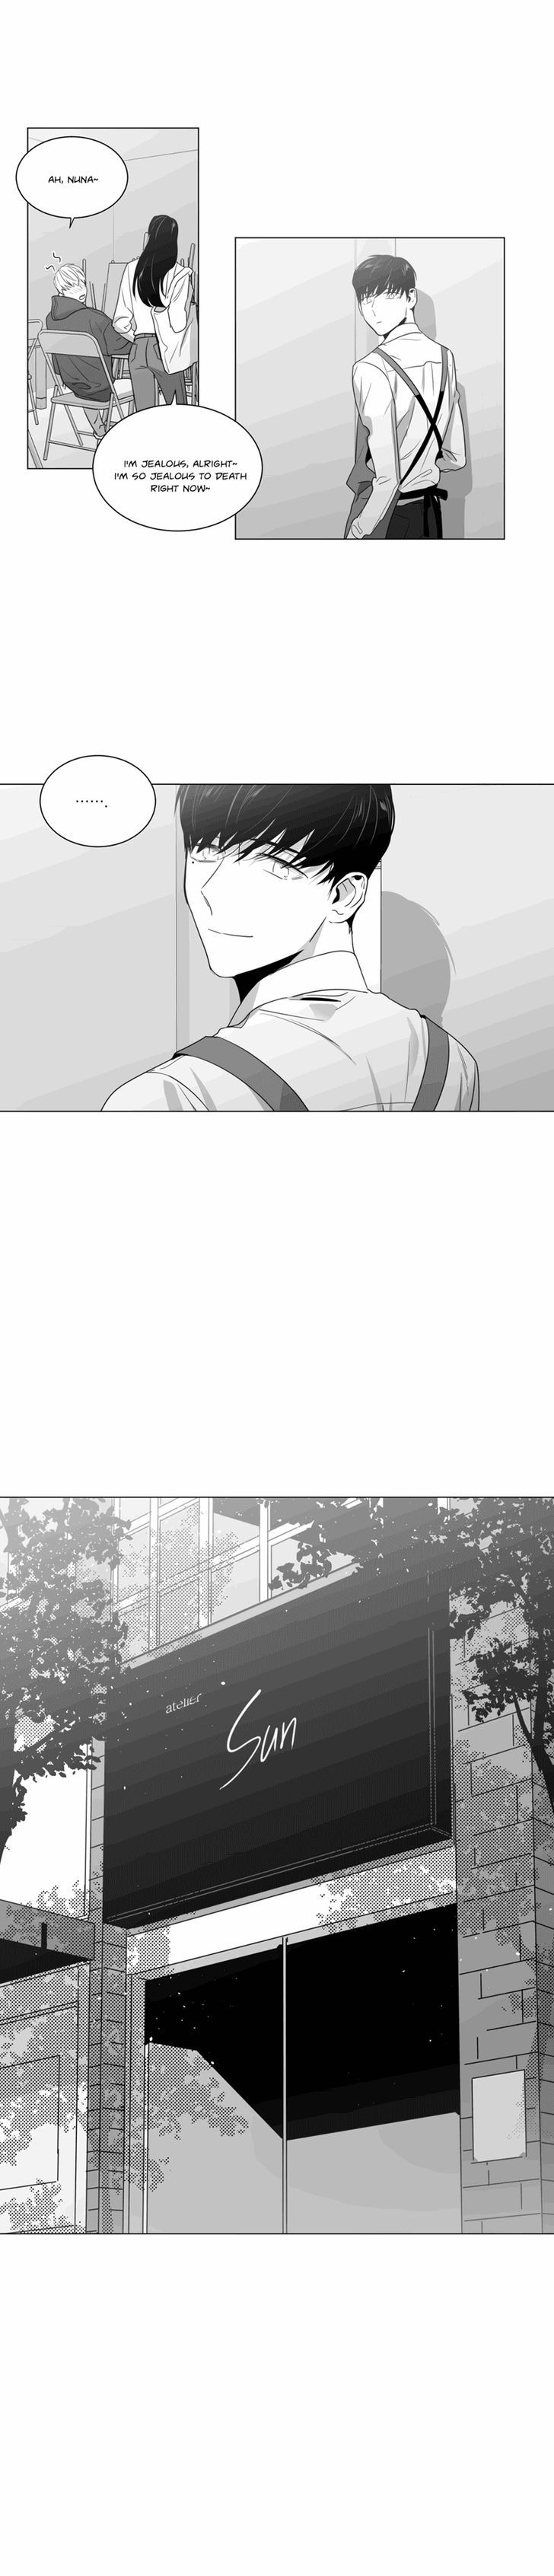 Lover Boy (Lezhin) Chapter 035 page 7